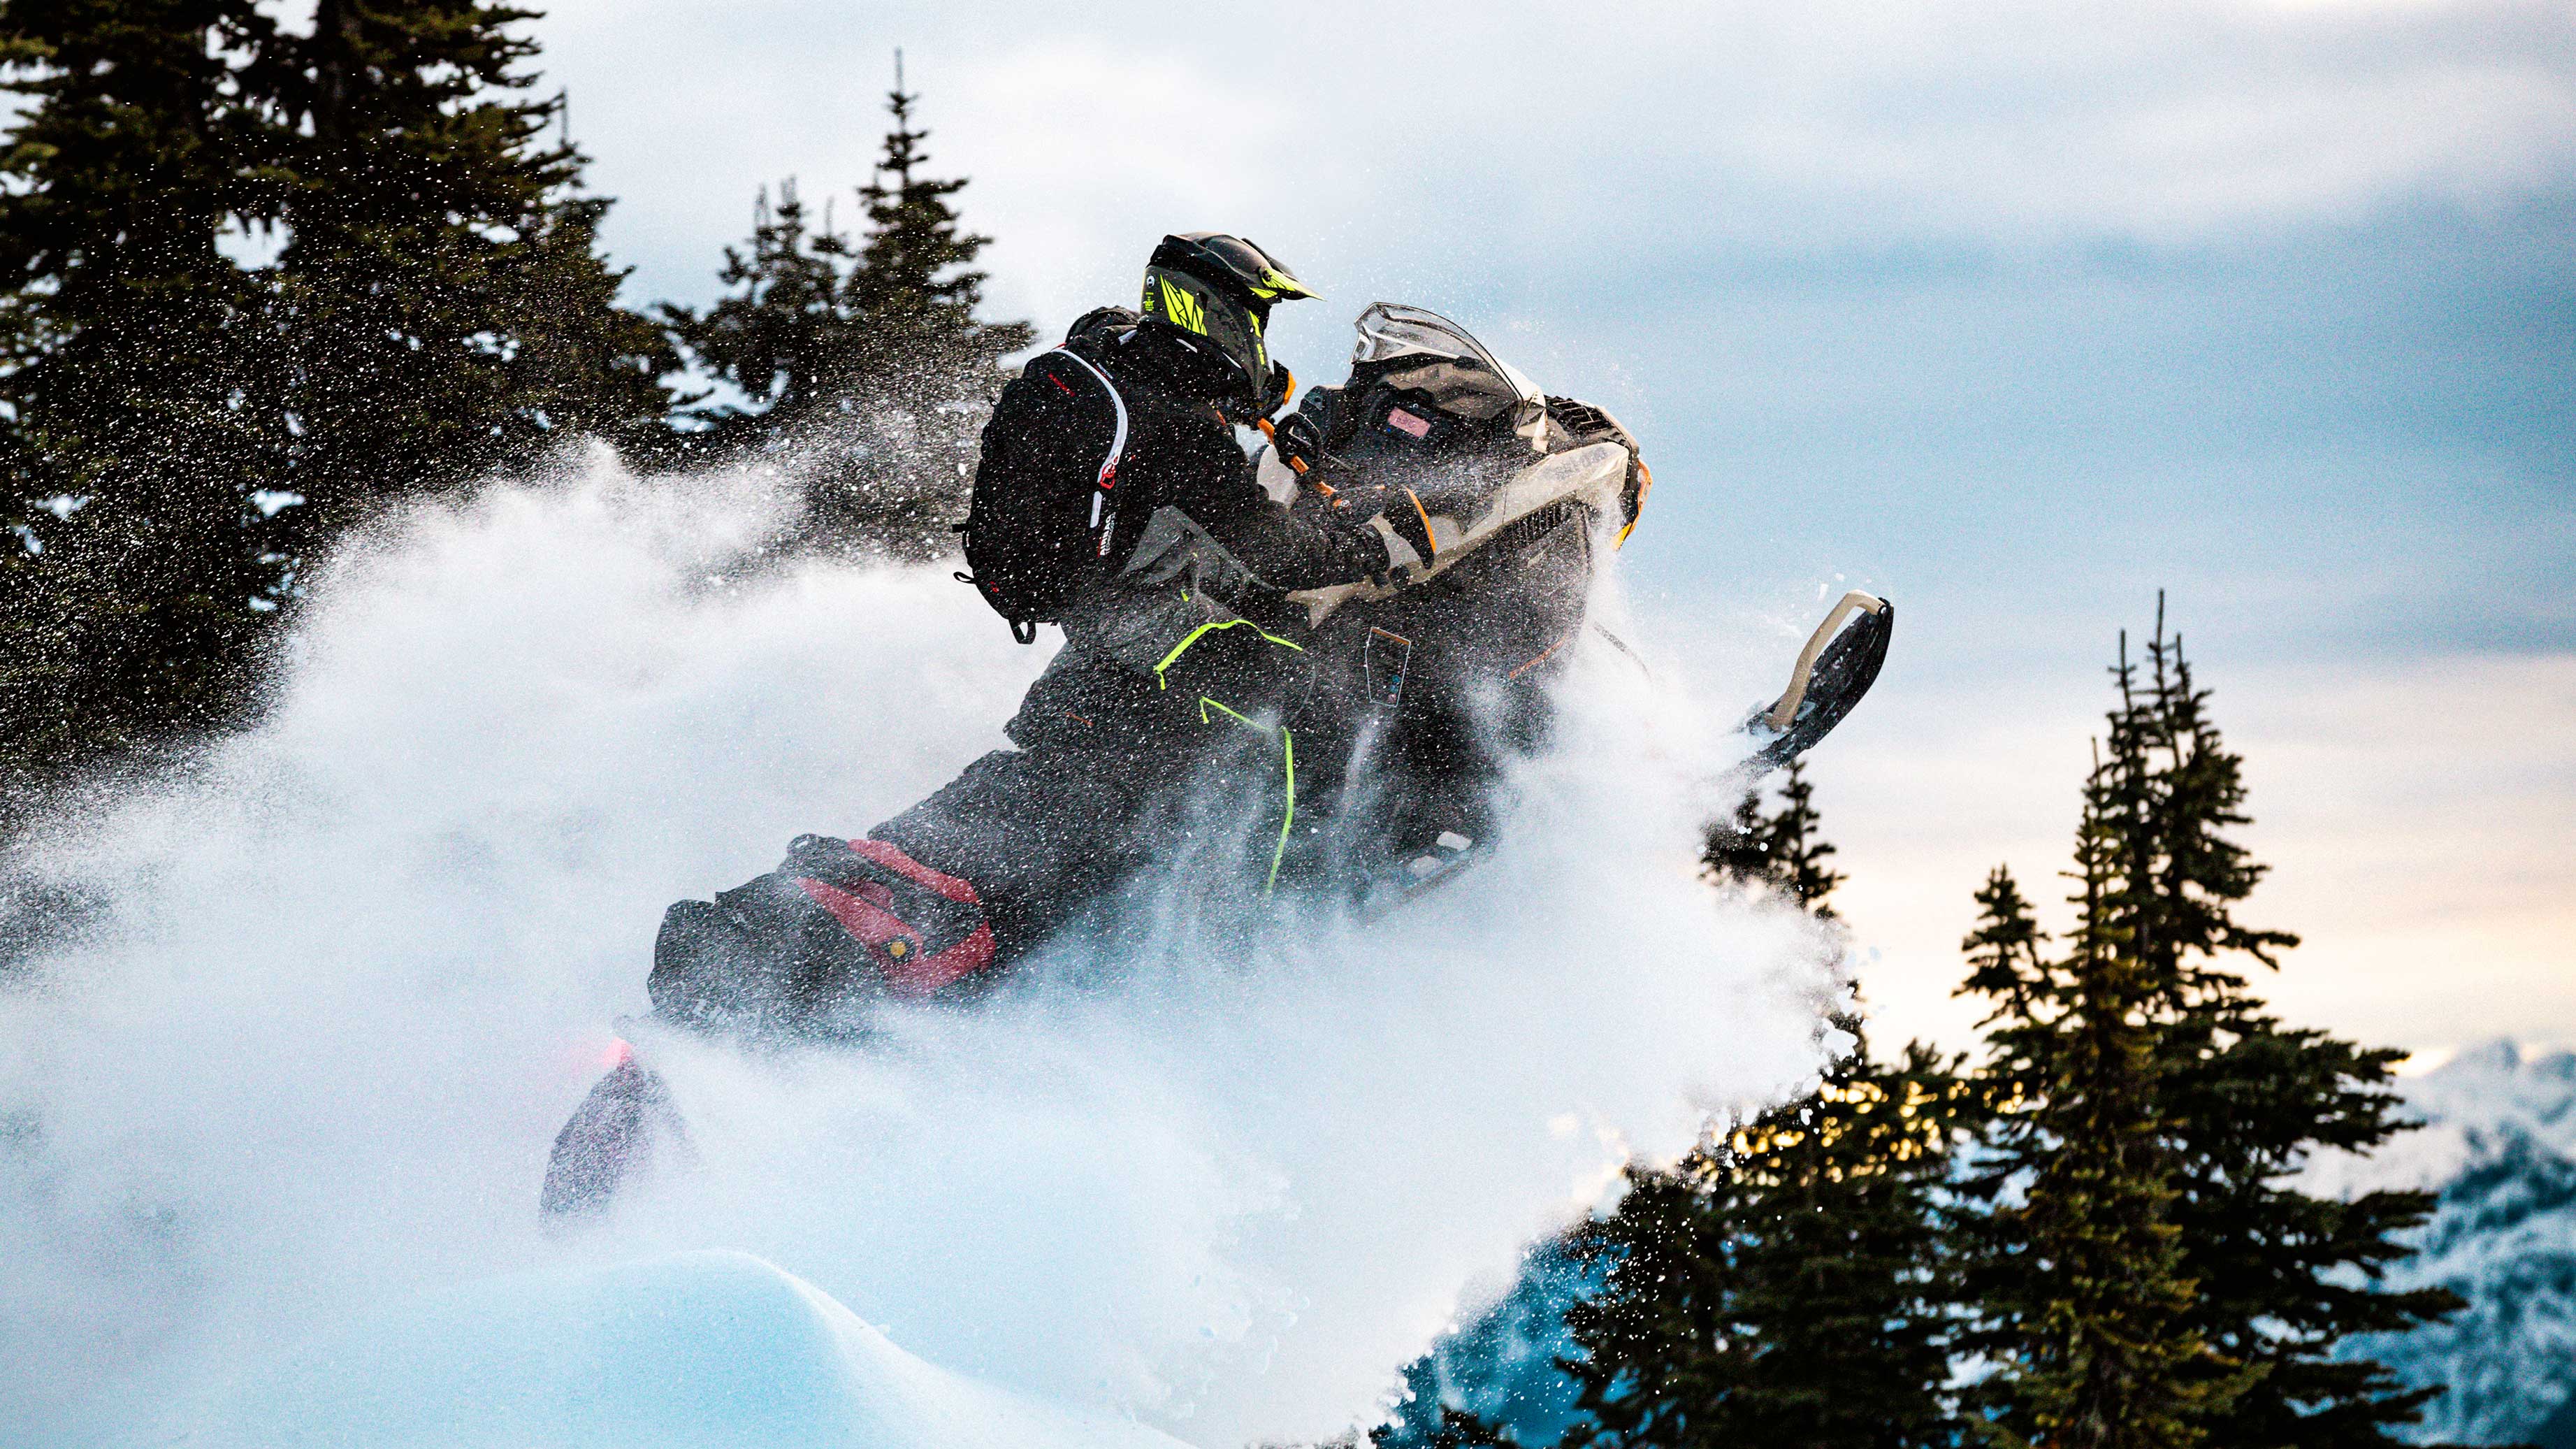 2022 Ski-Doo Expedition jumping in Deep-Snow